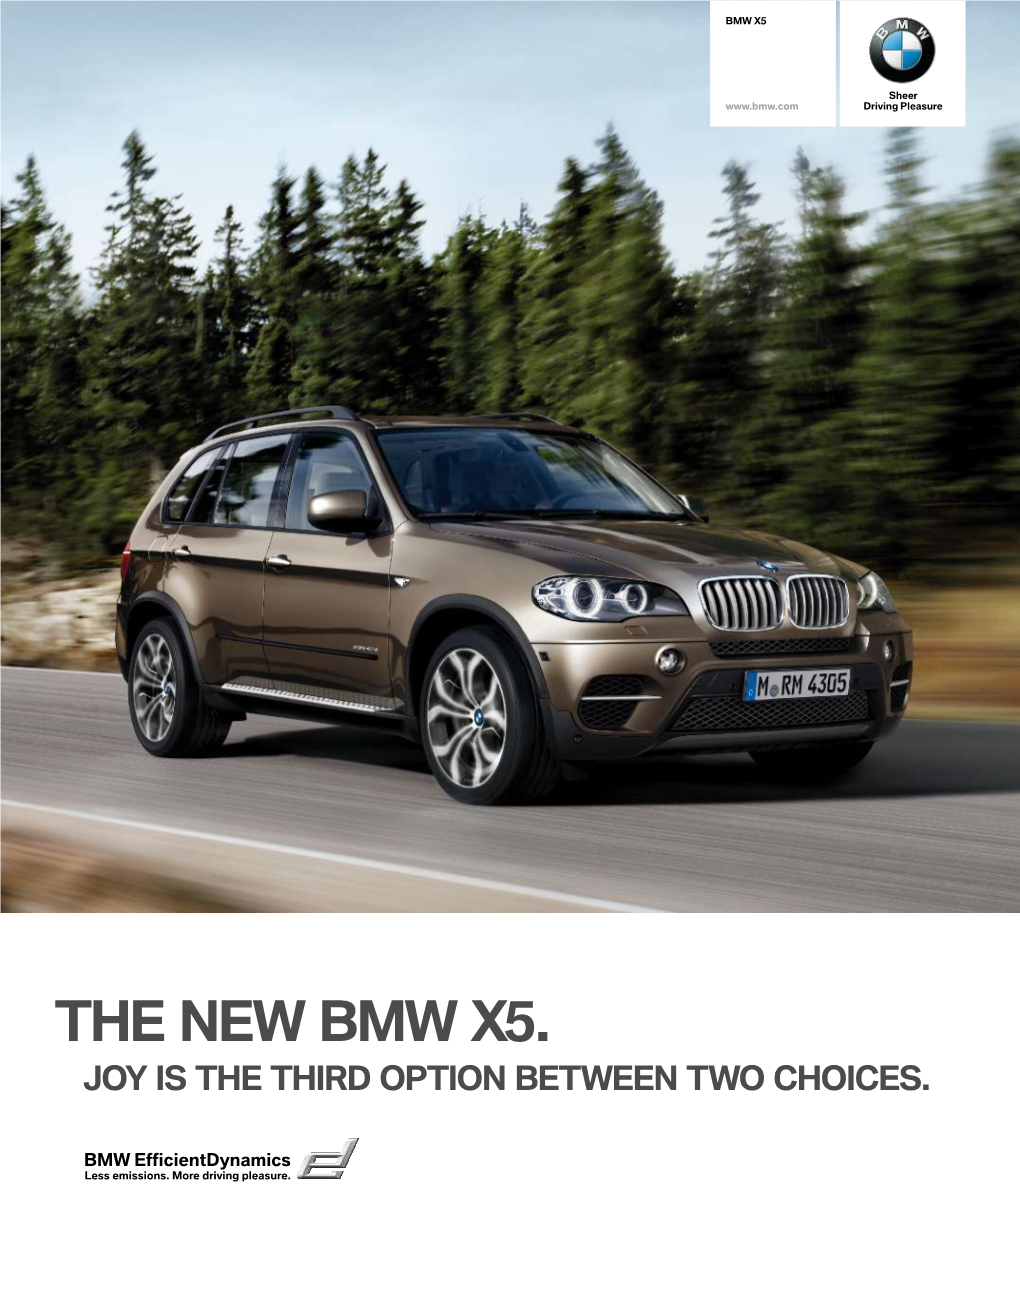 The New Bmw X5